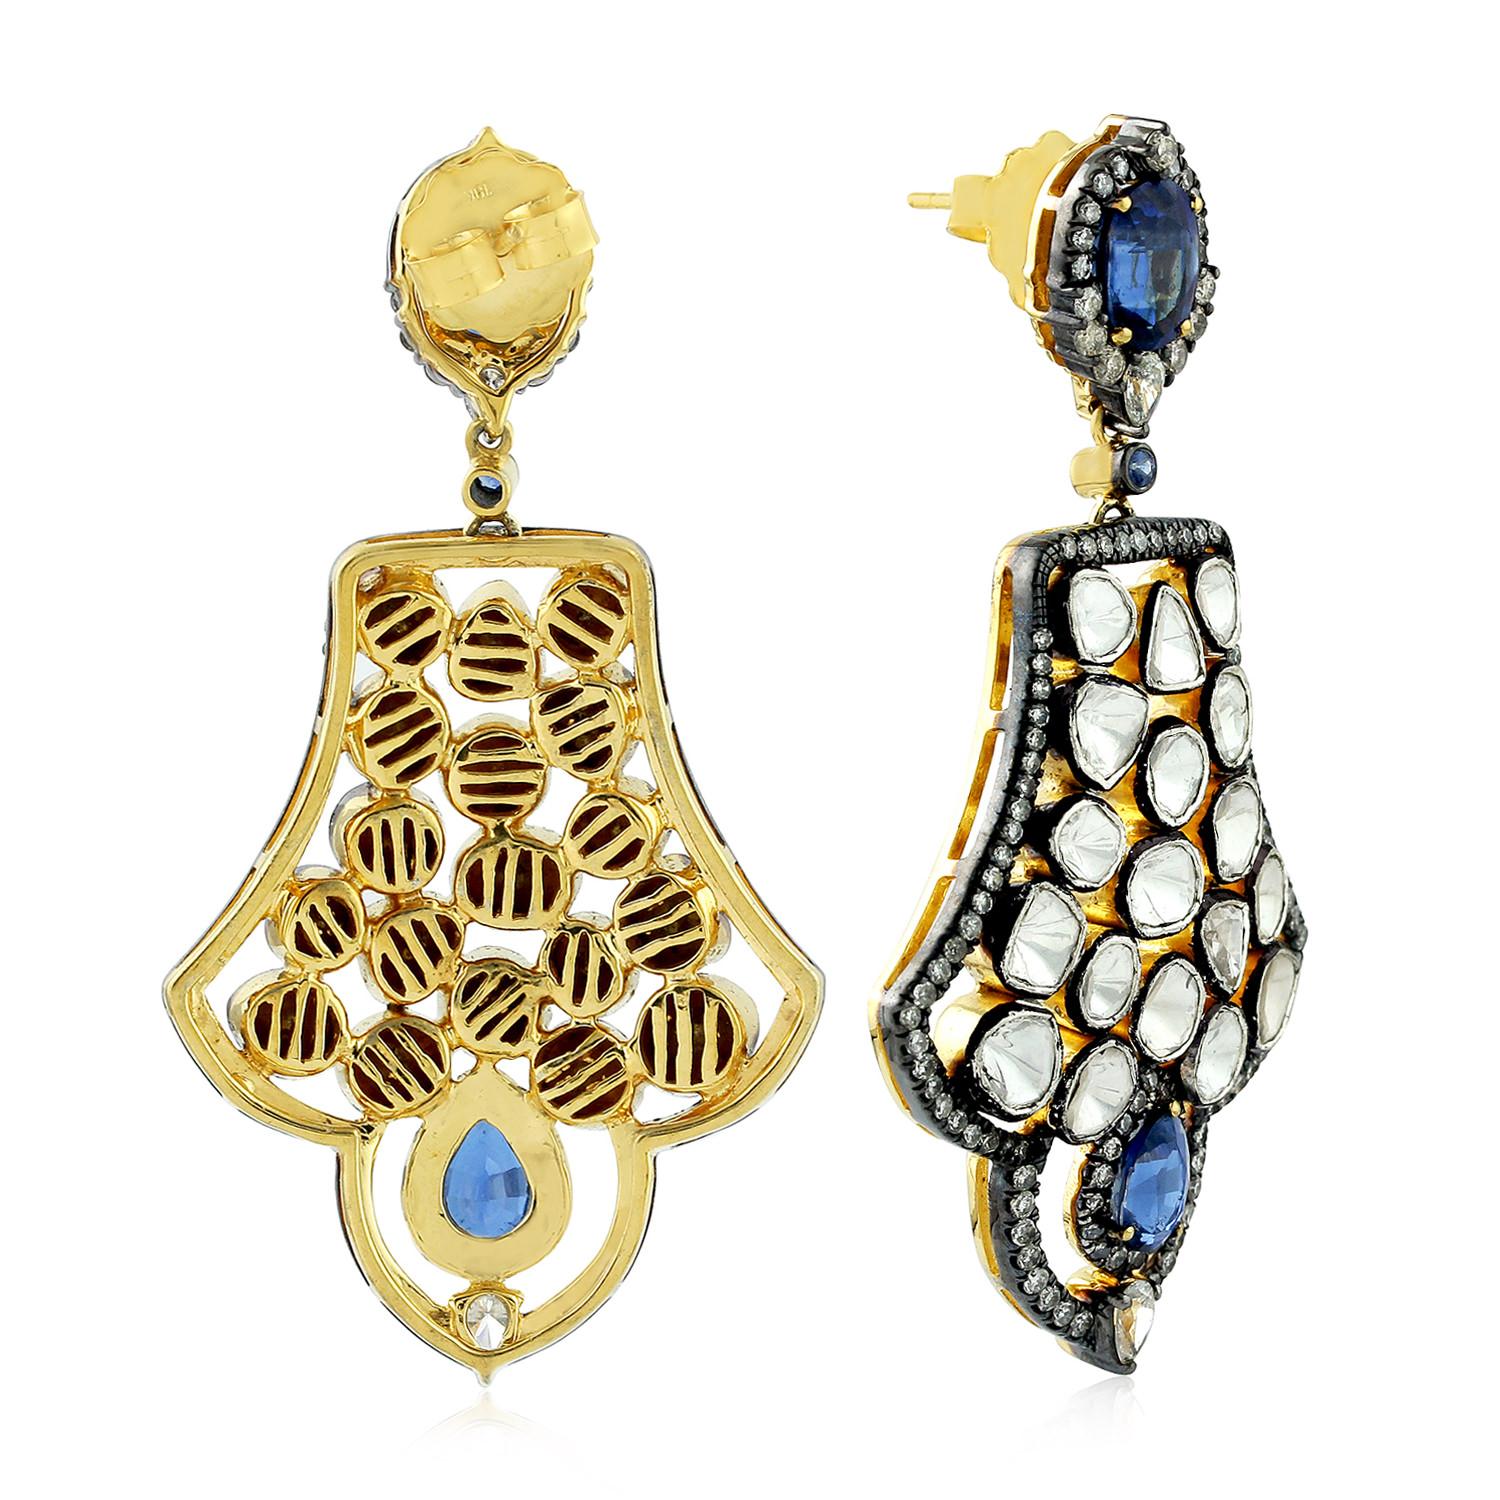 Blue Sapphire Polki Diamond Dangle Earrings with Sterling Silver and 18k Gold

8.74 carats of White Polki and round cut diamonds 5.68 Carat Kyanite and Blue Sapphire set in .925 Sterling Silver and 18k Gold Dangle Earrings.

We guarantee all